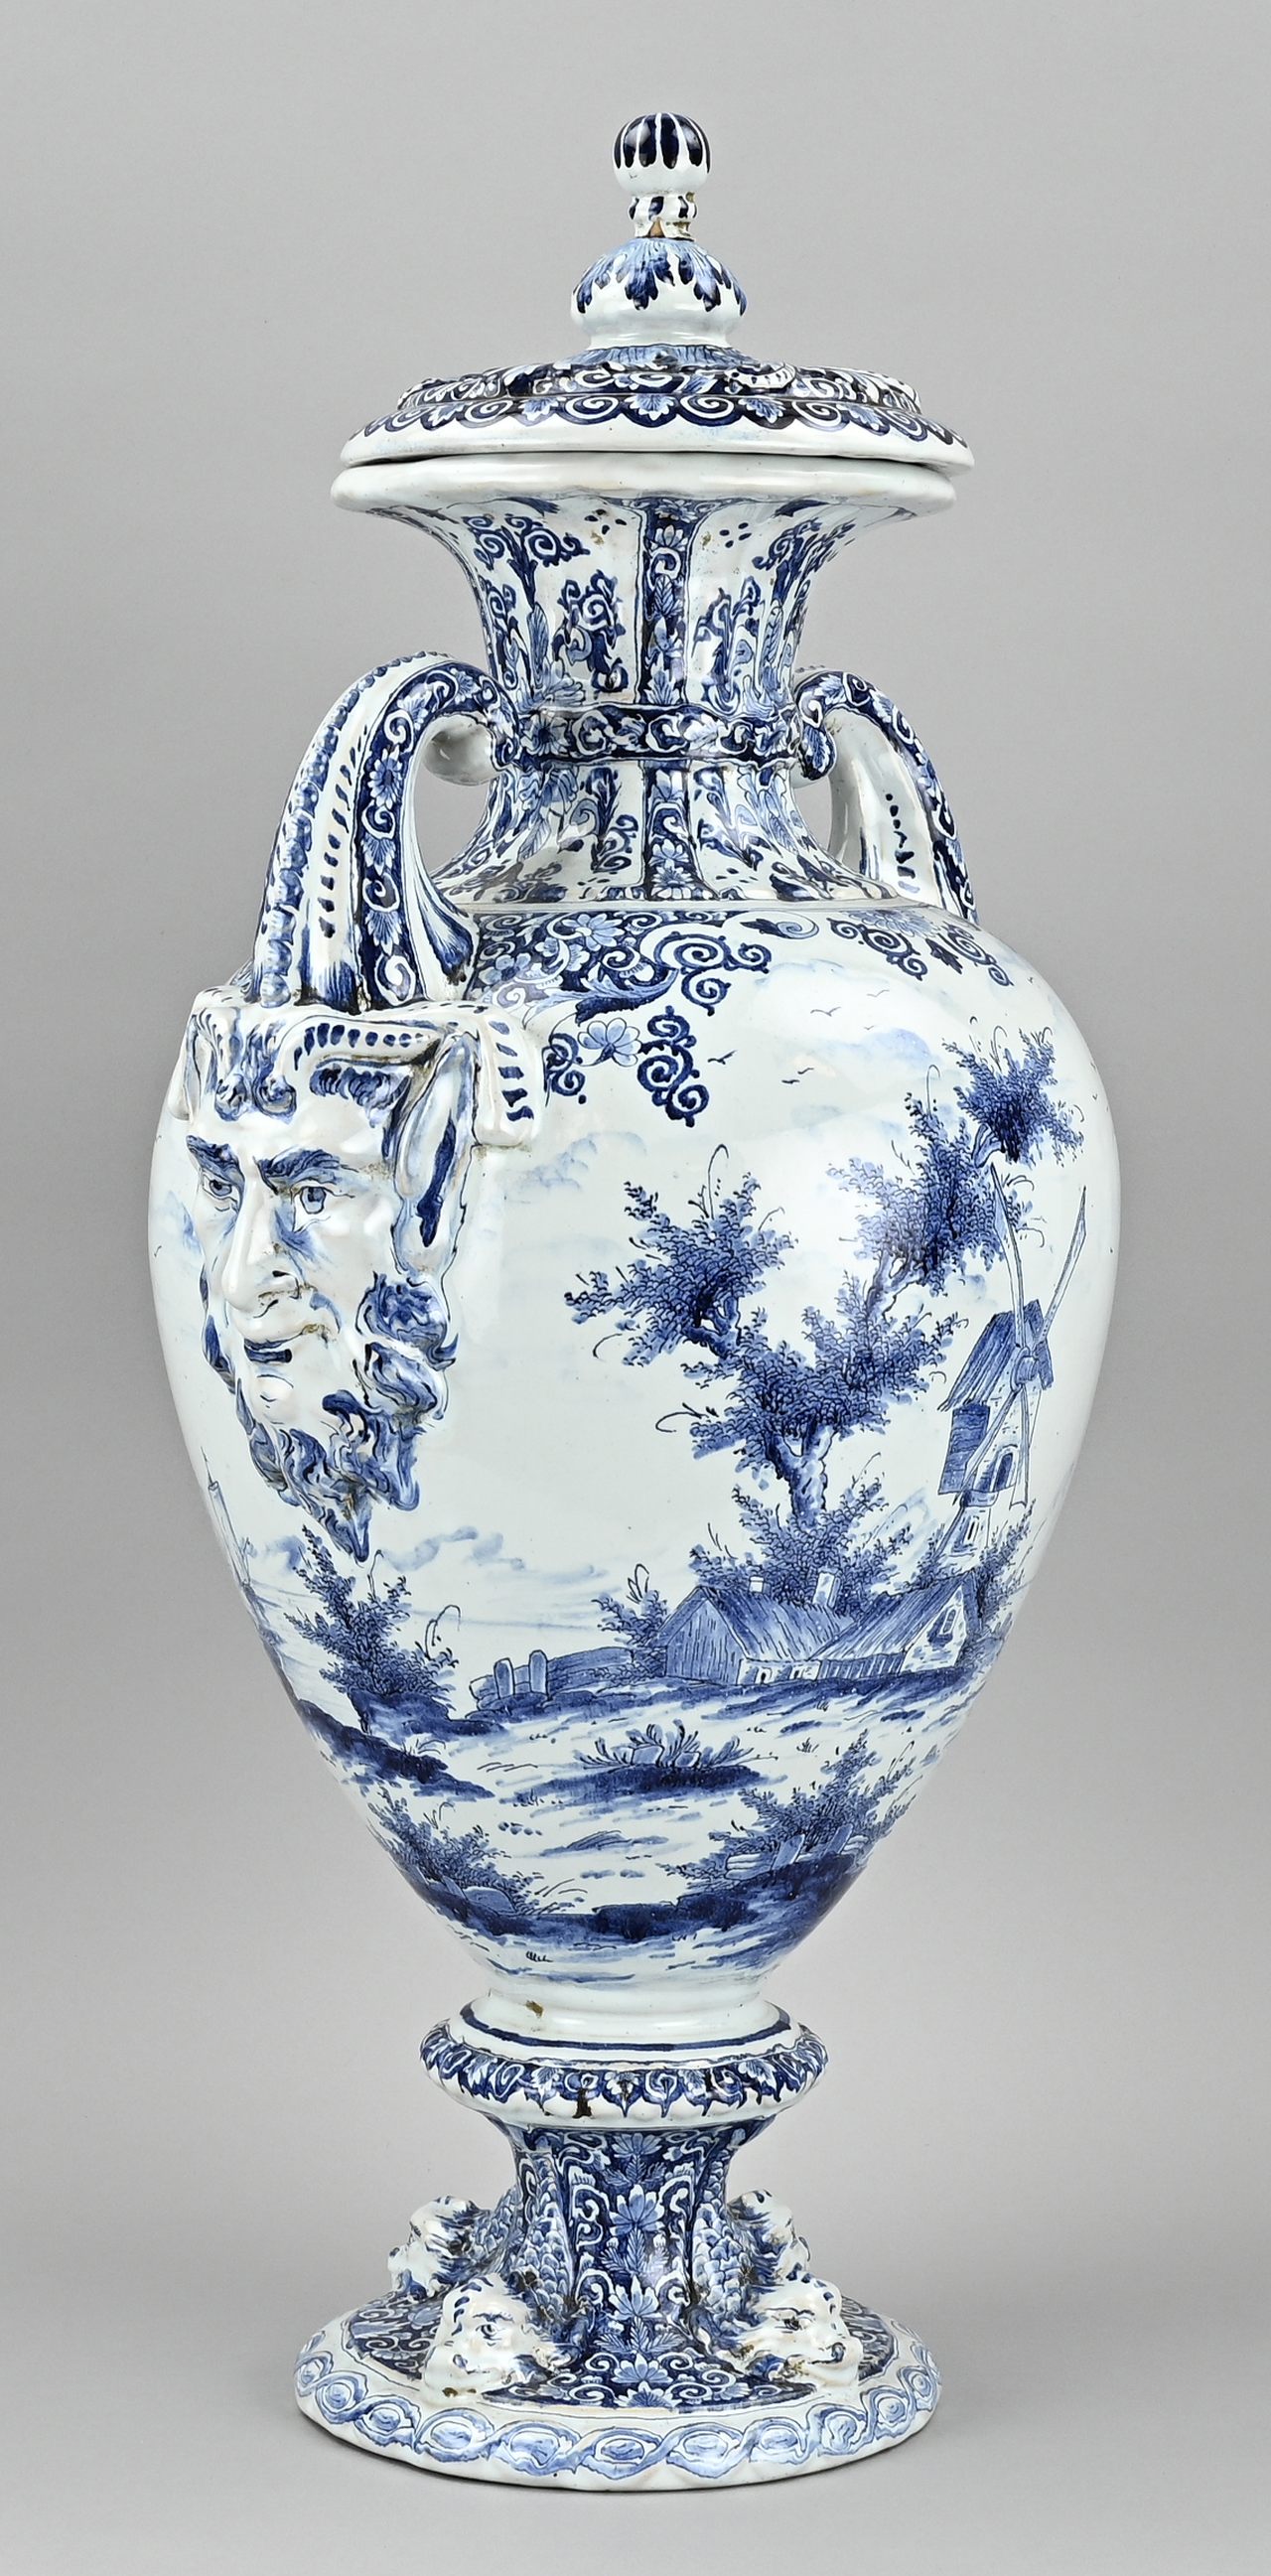 Delft Pronk vase with lid, H 60 cm. - Image 2 of 3